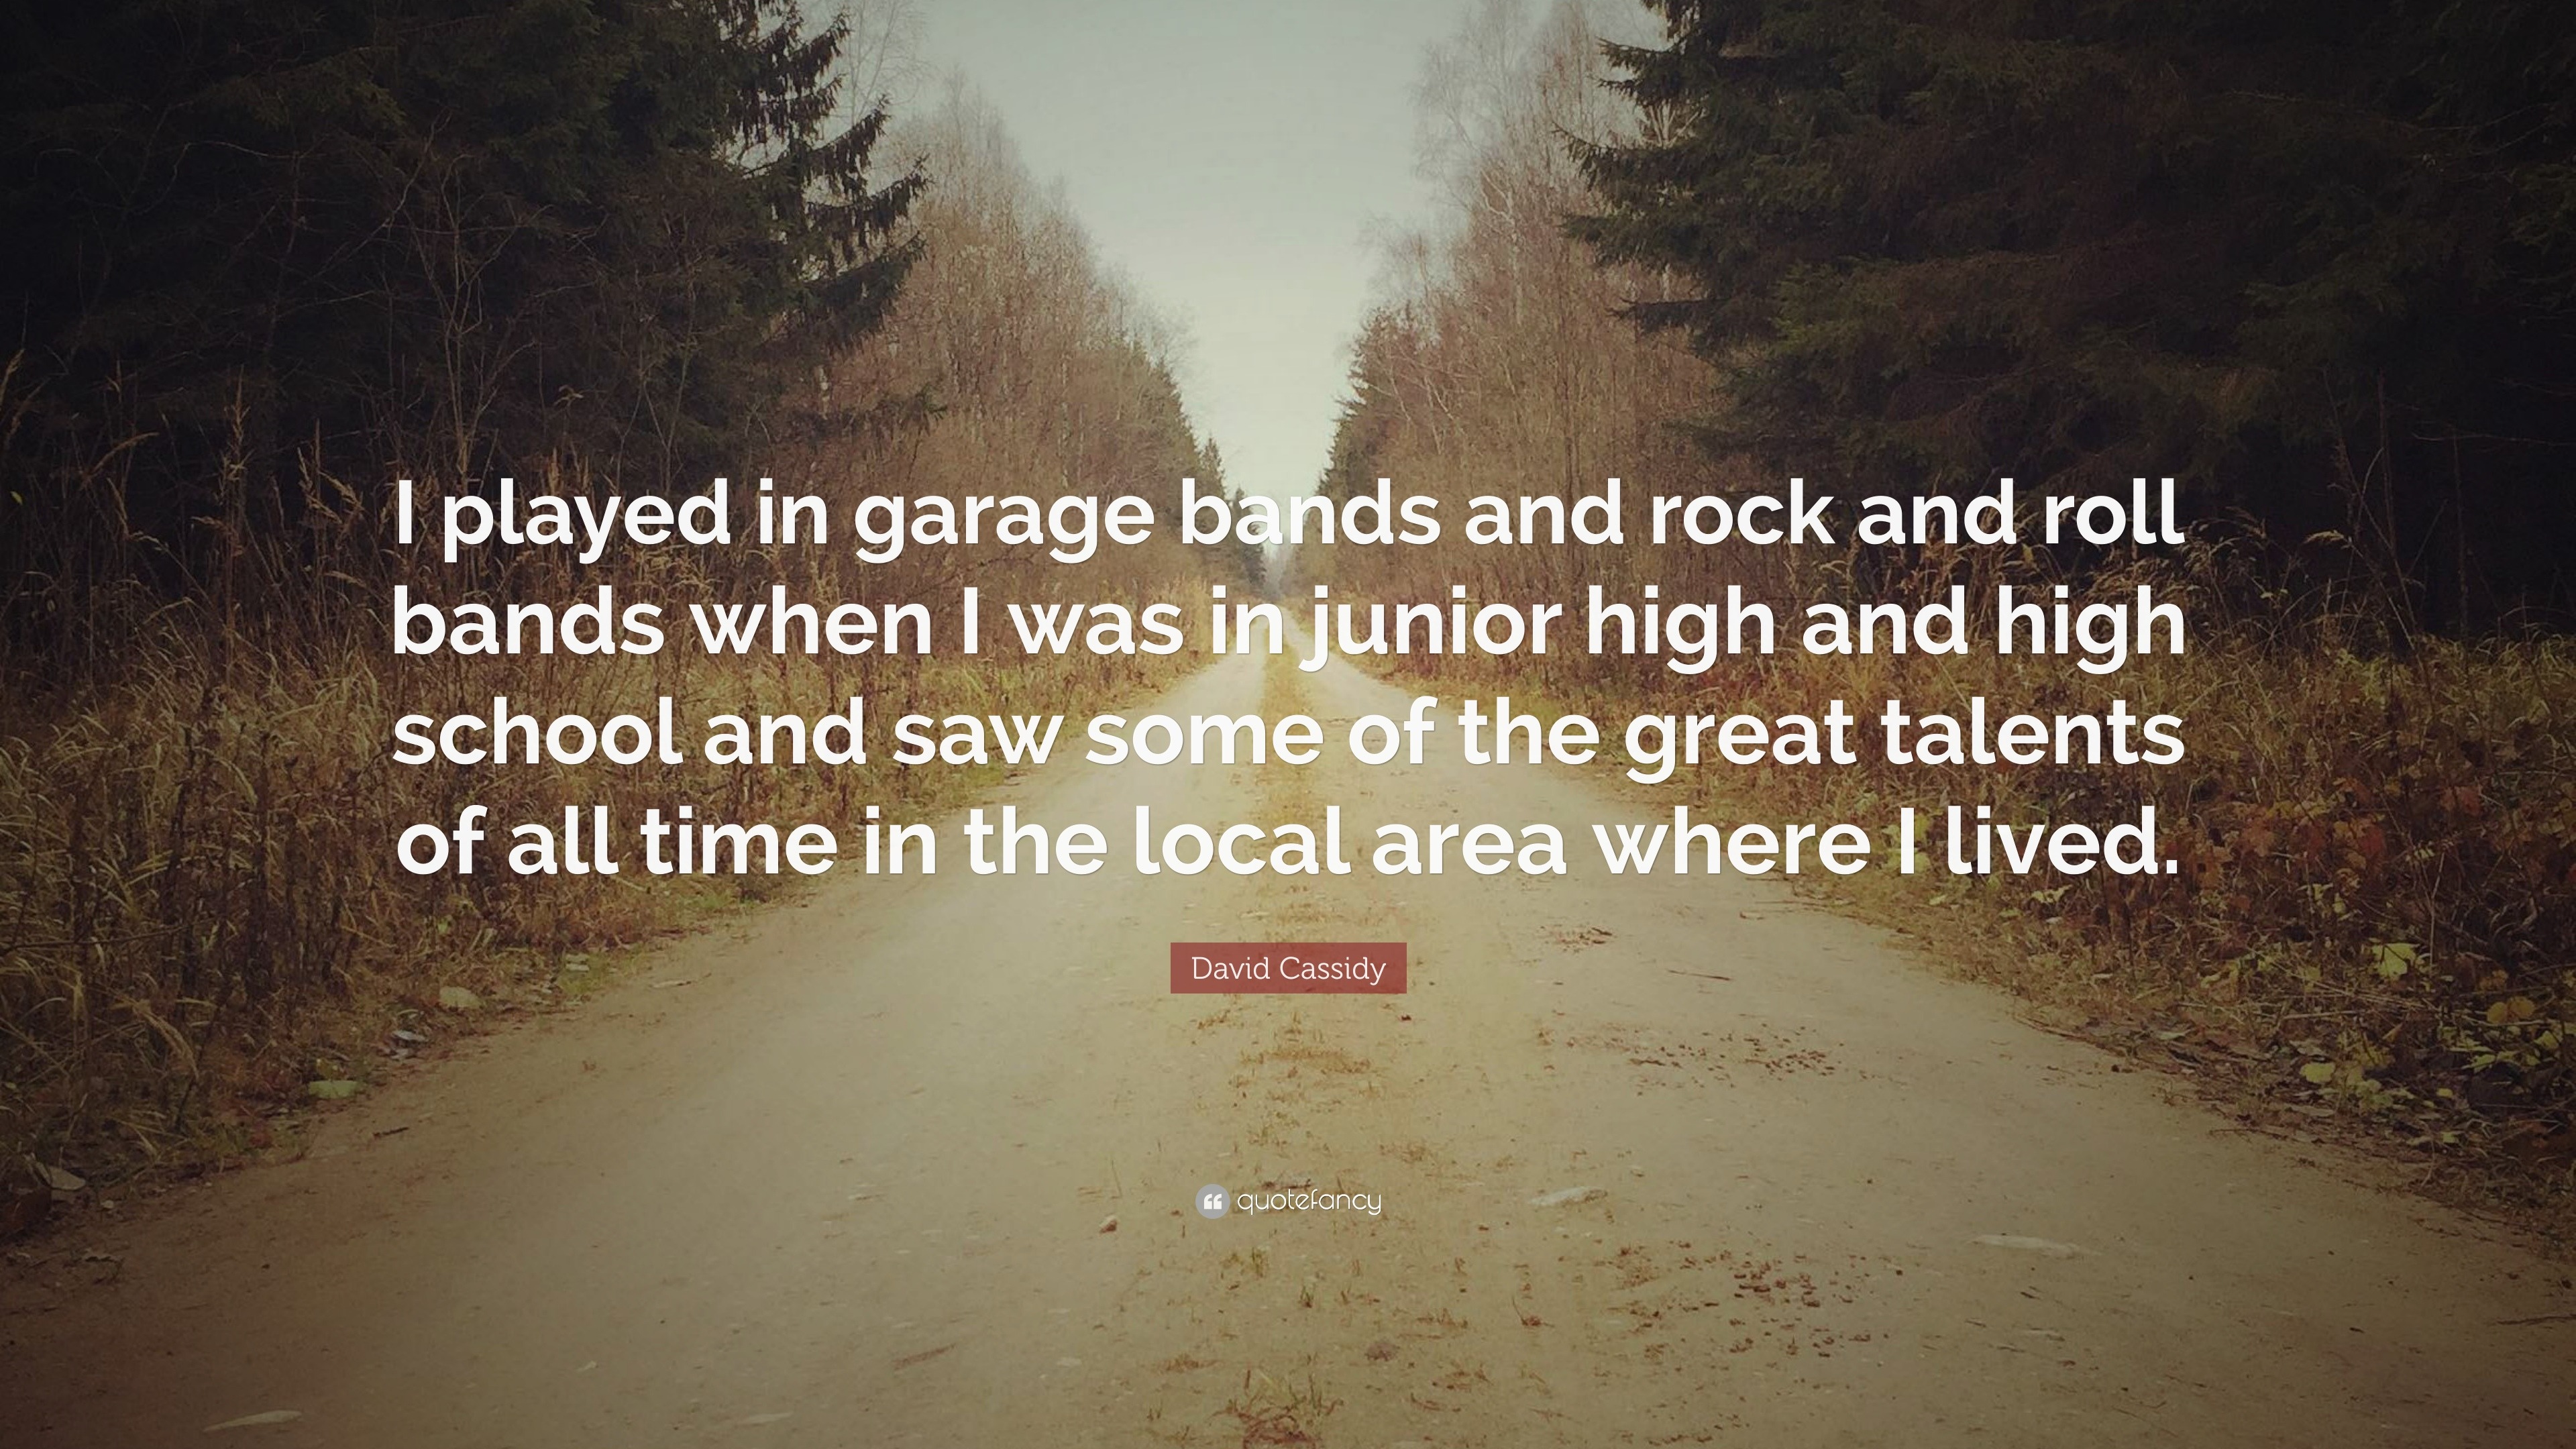 David Cassidy Quote: “I played in garage bands and rock and roll ...